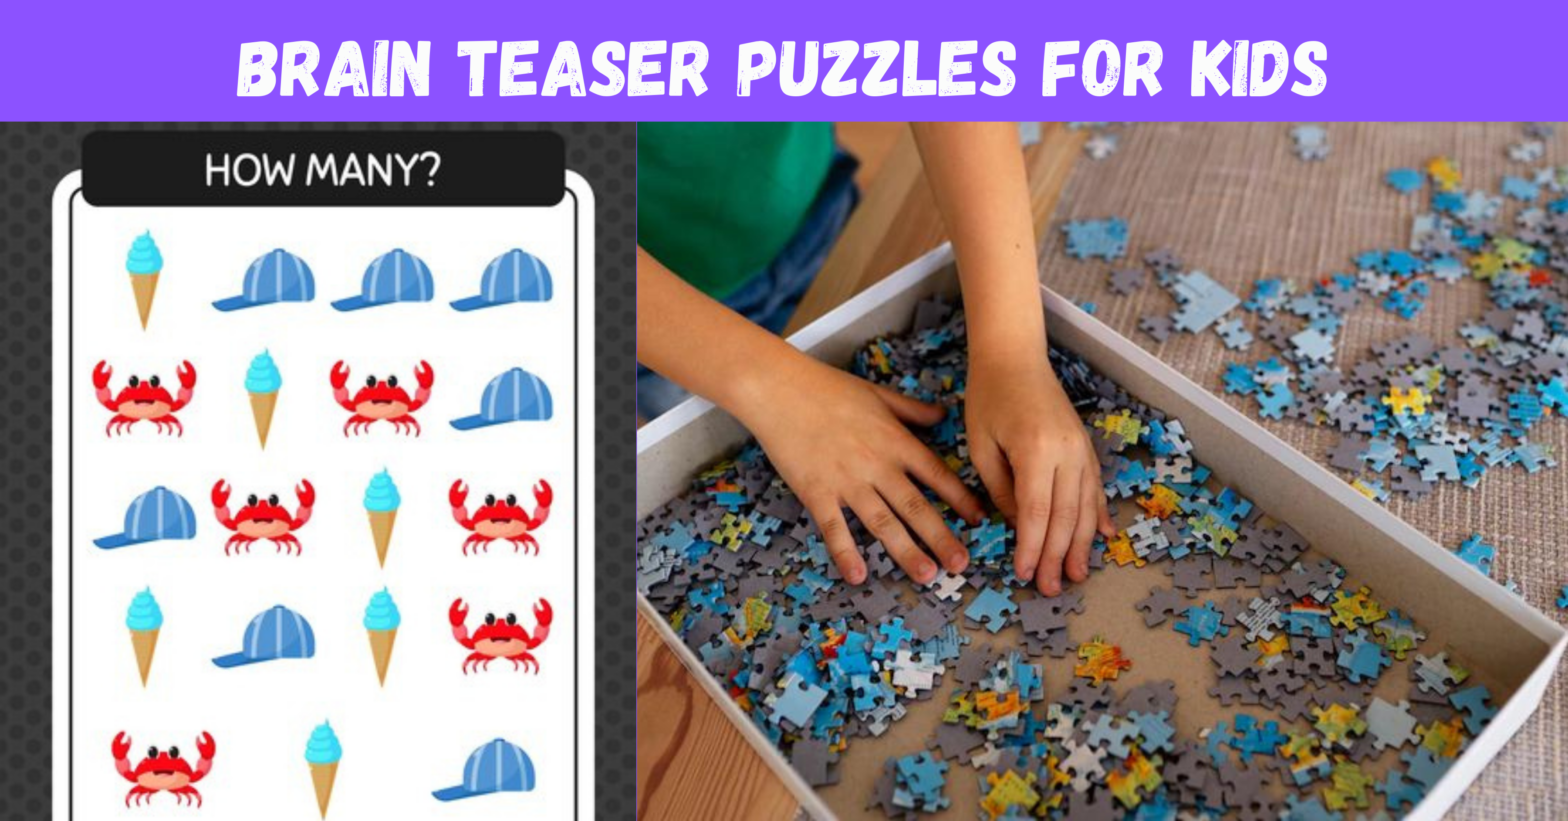 PUZZLES FOR YOUR CHILD